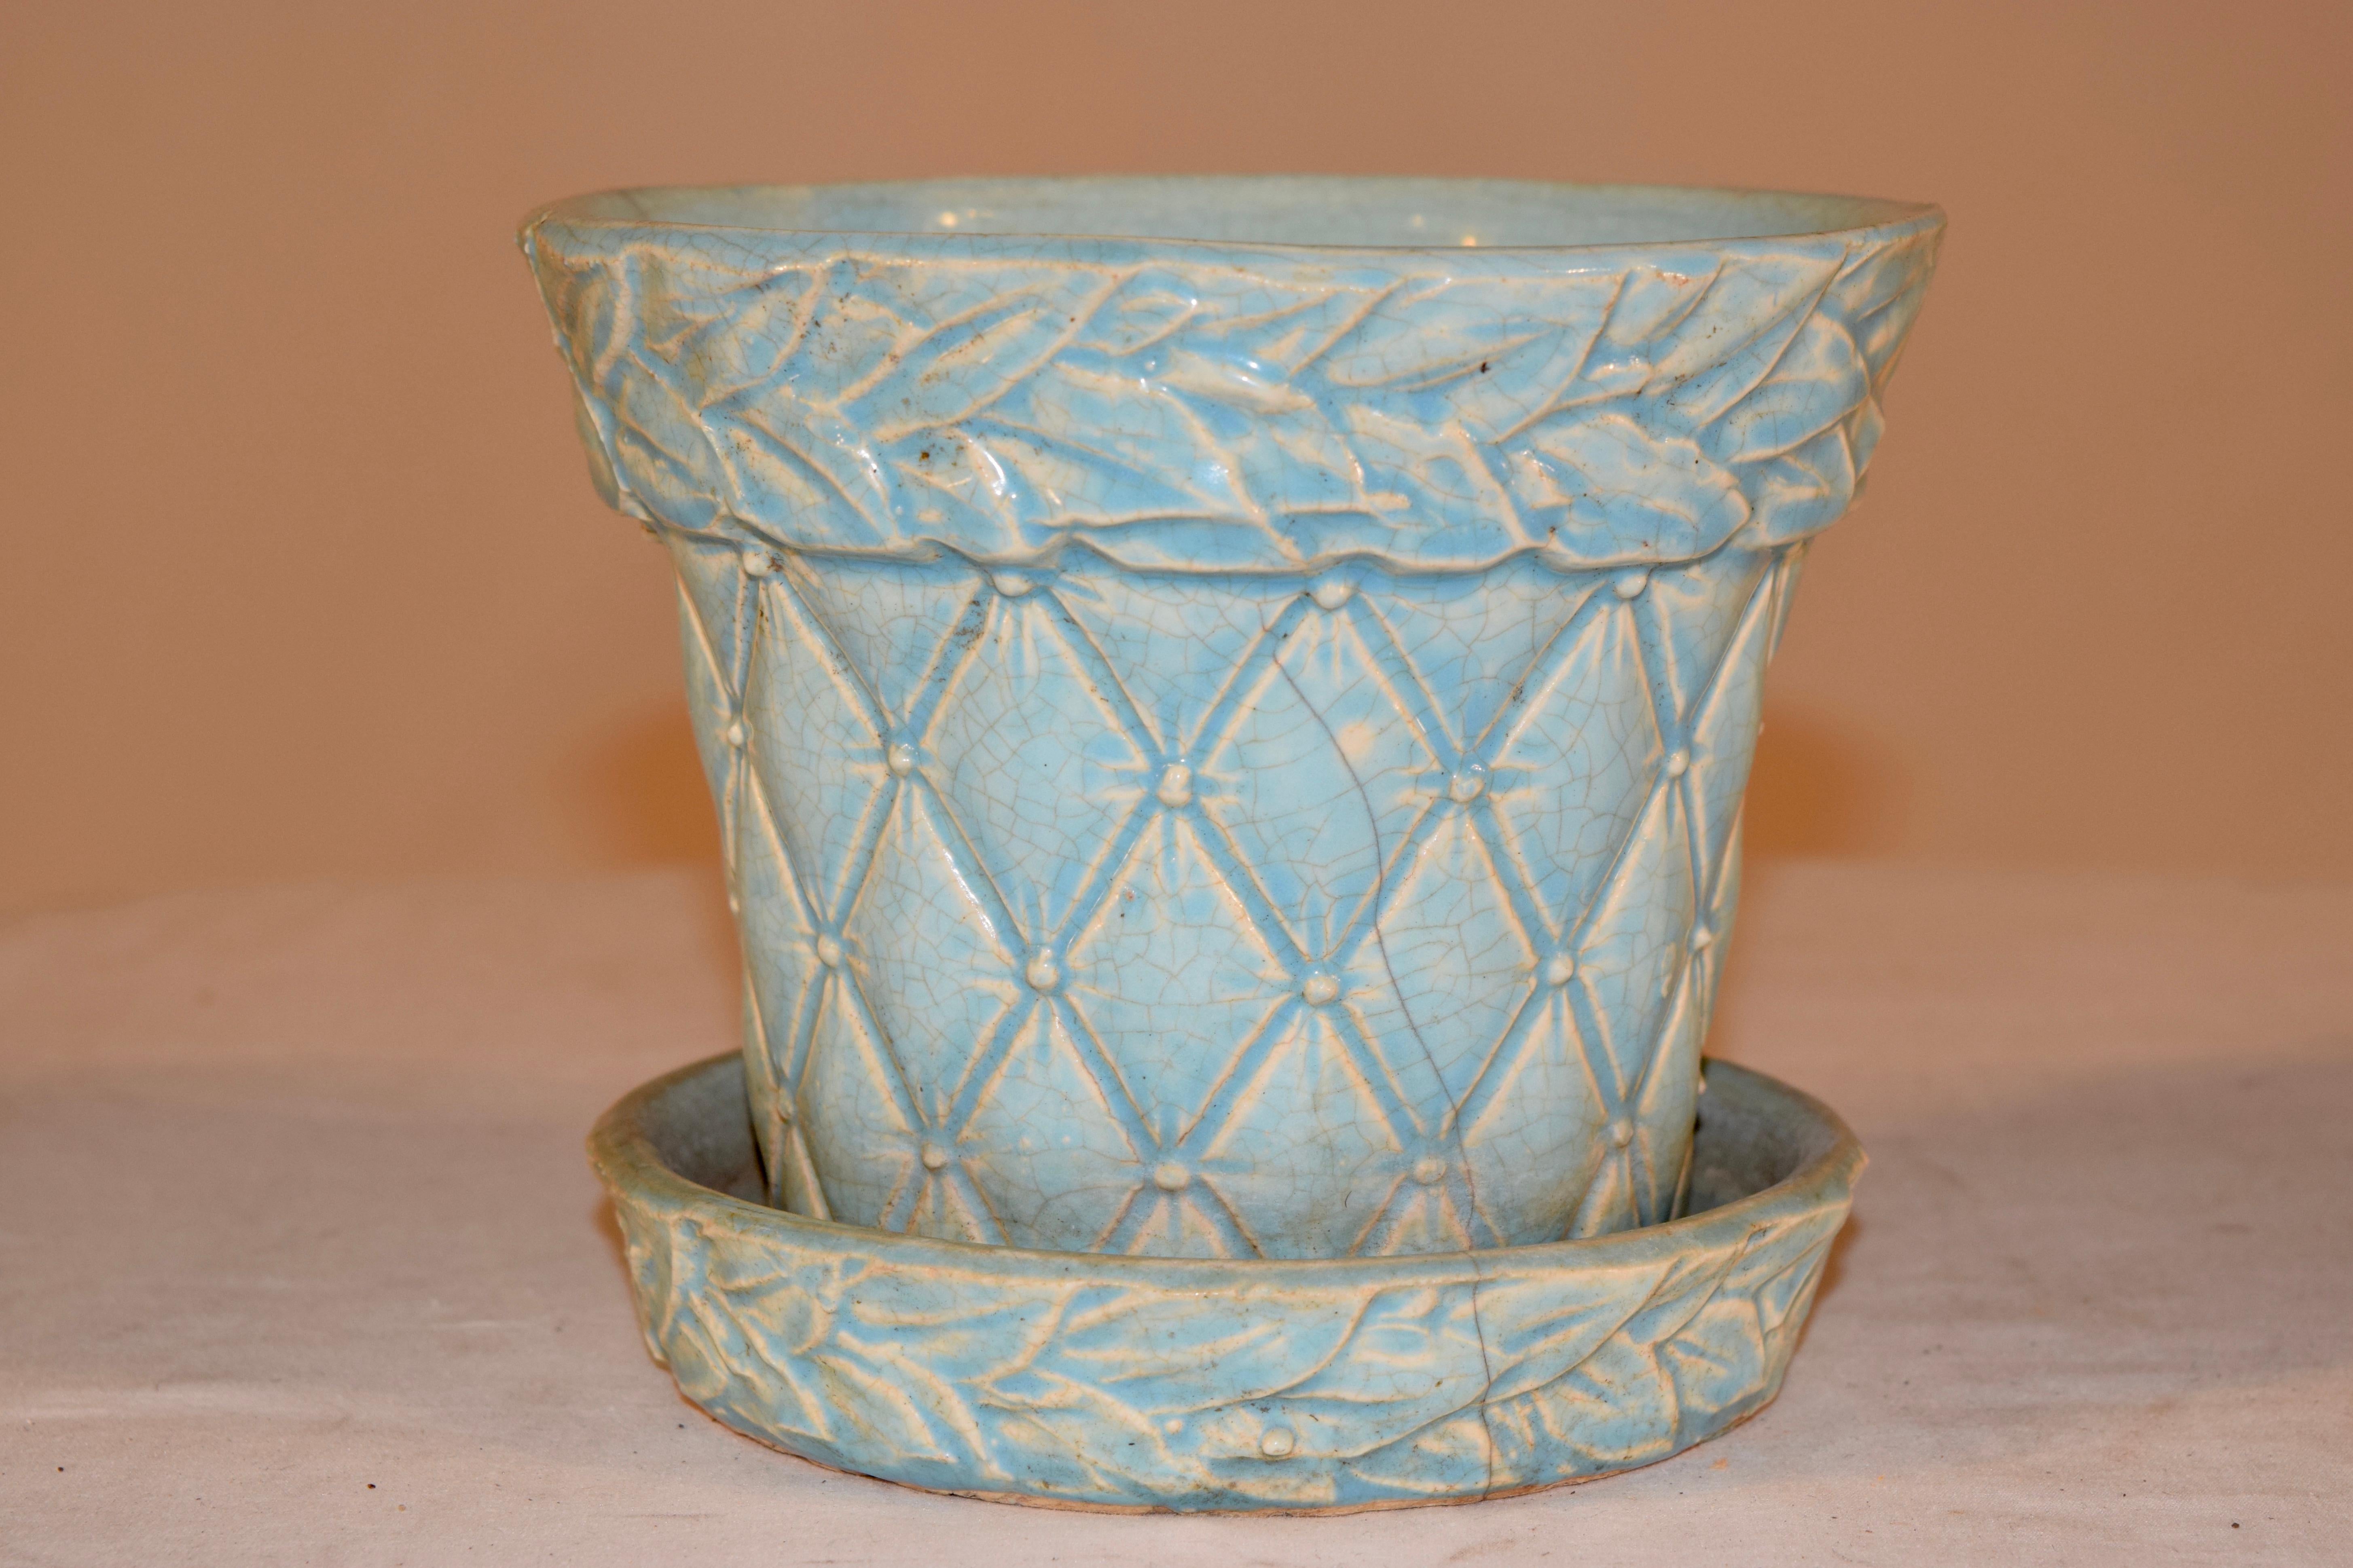 Midcentury McCoy turquoise pottery planter pot of quilted design with carved leaf detail. The saucer is attached and has a drainage hole. A great example of American art pottery.